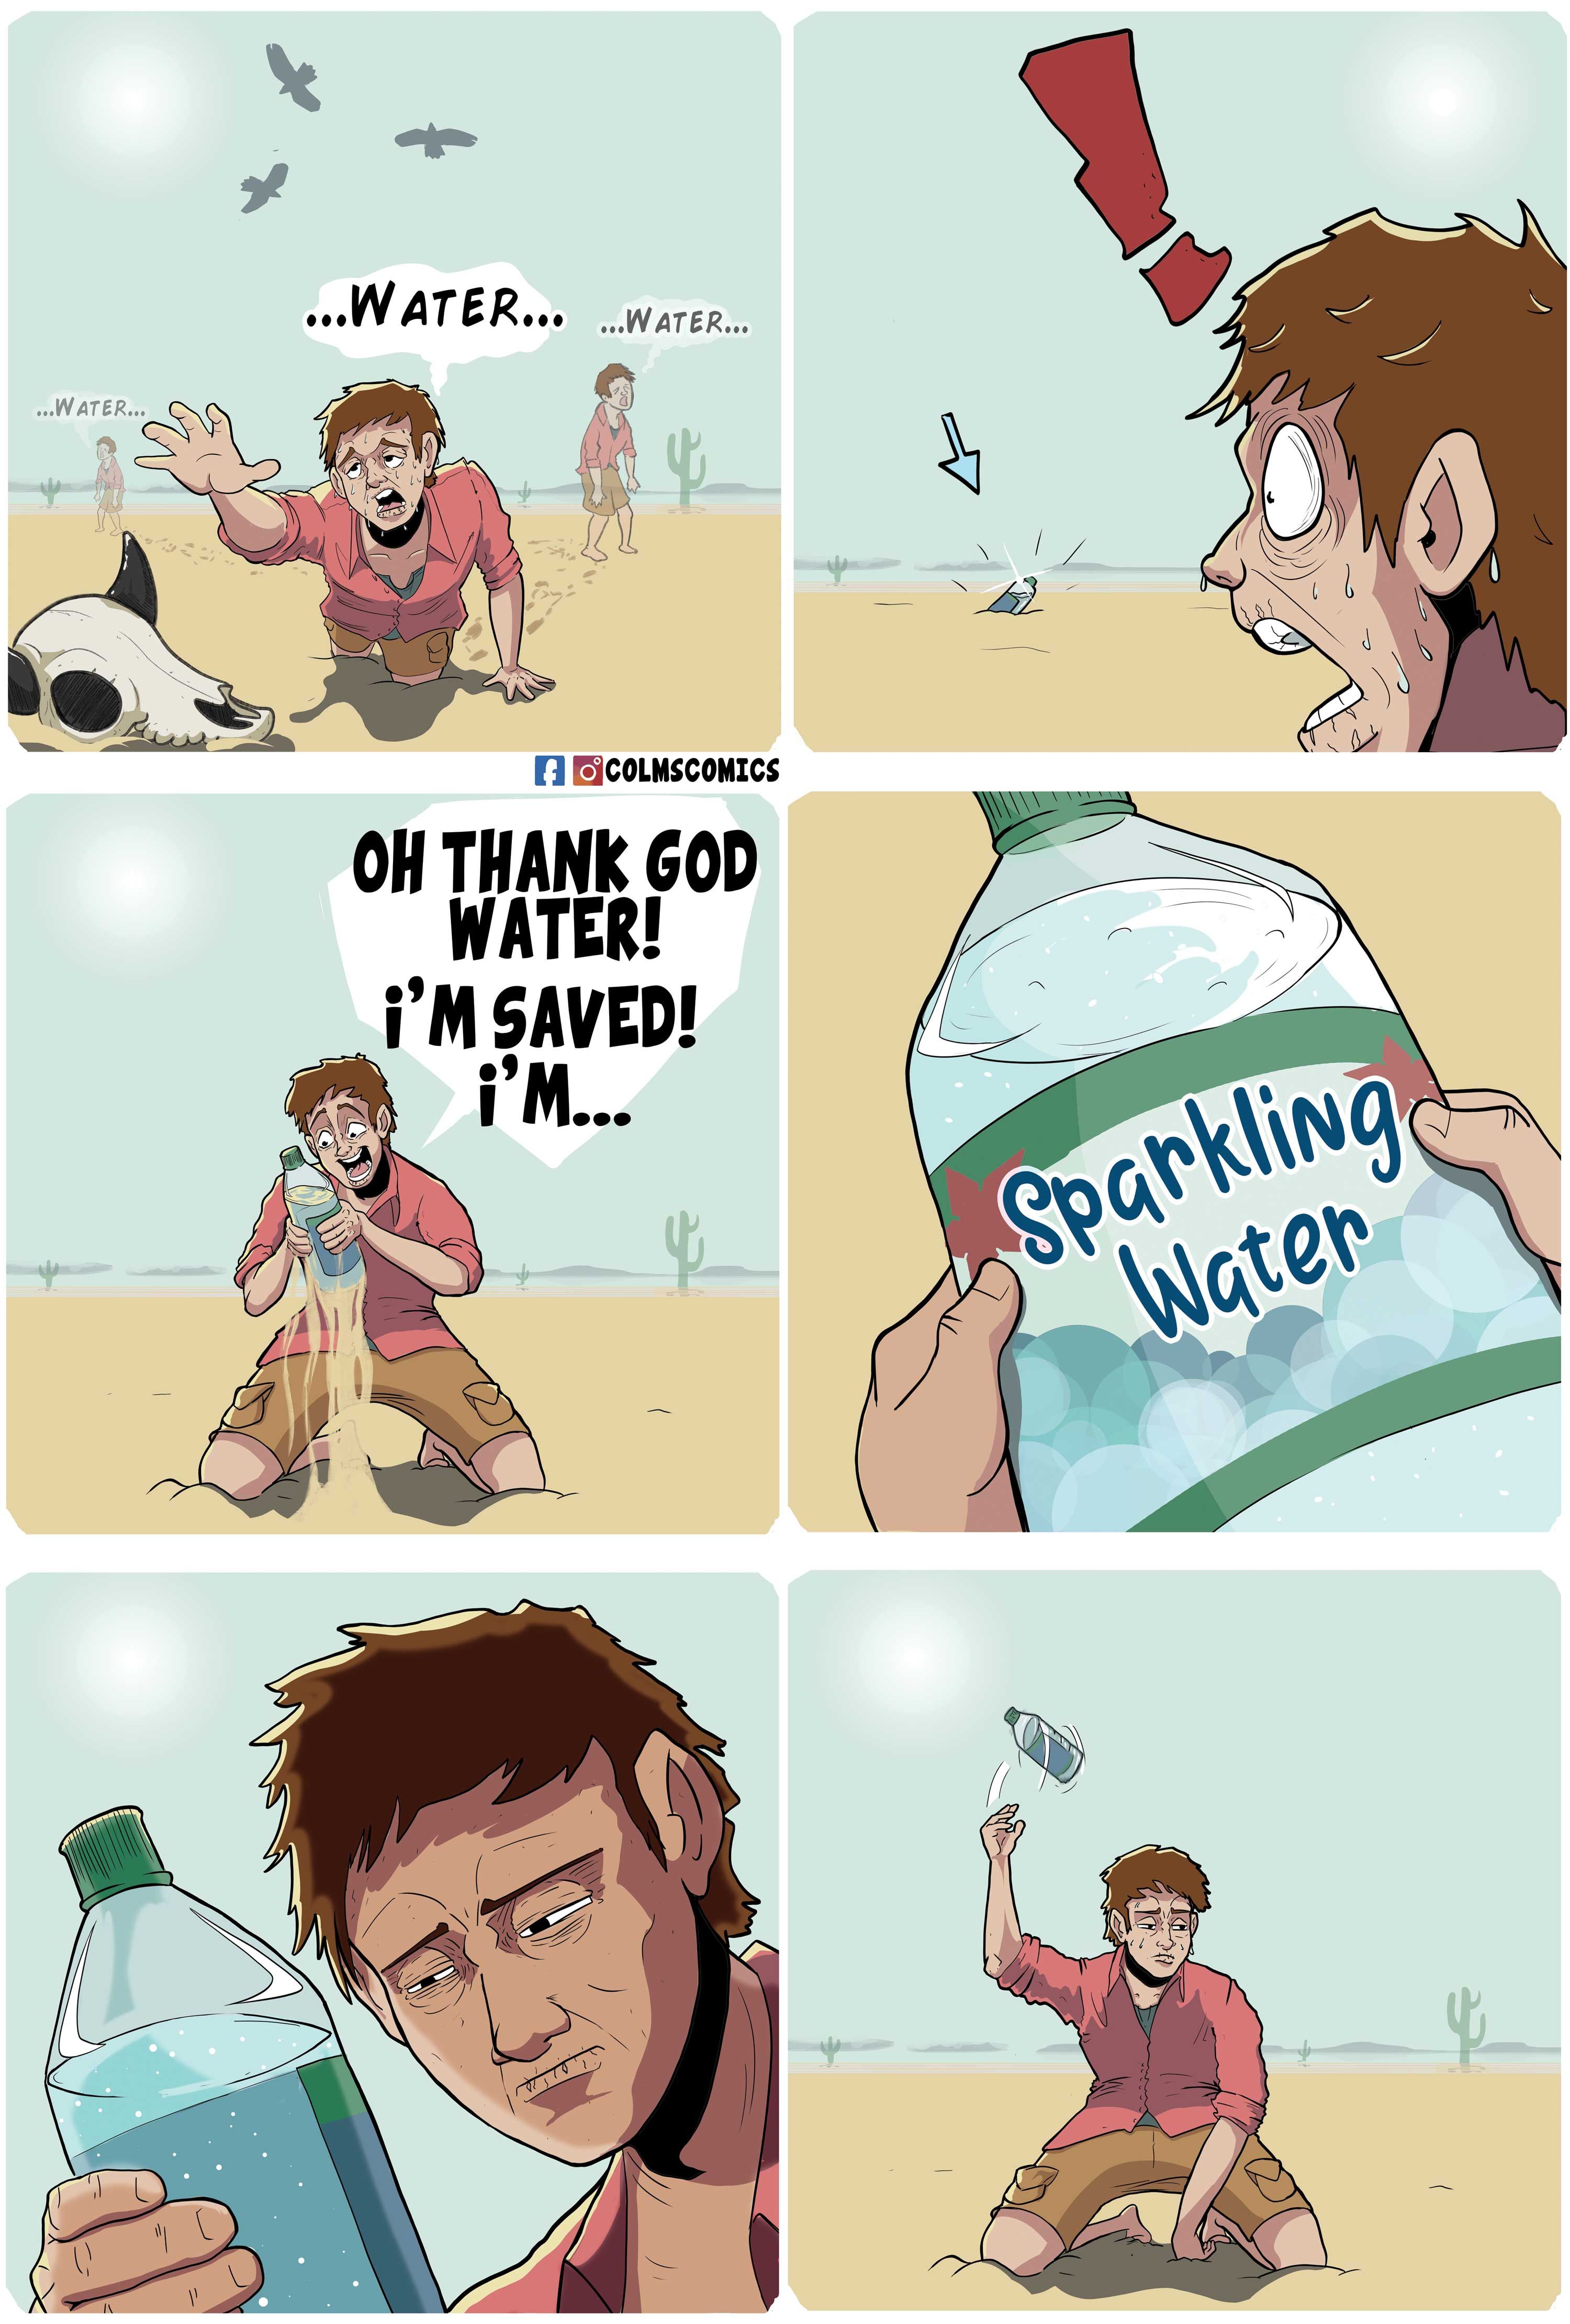 Controversial water comic